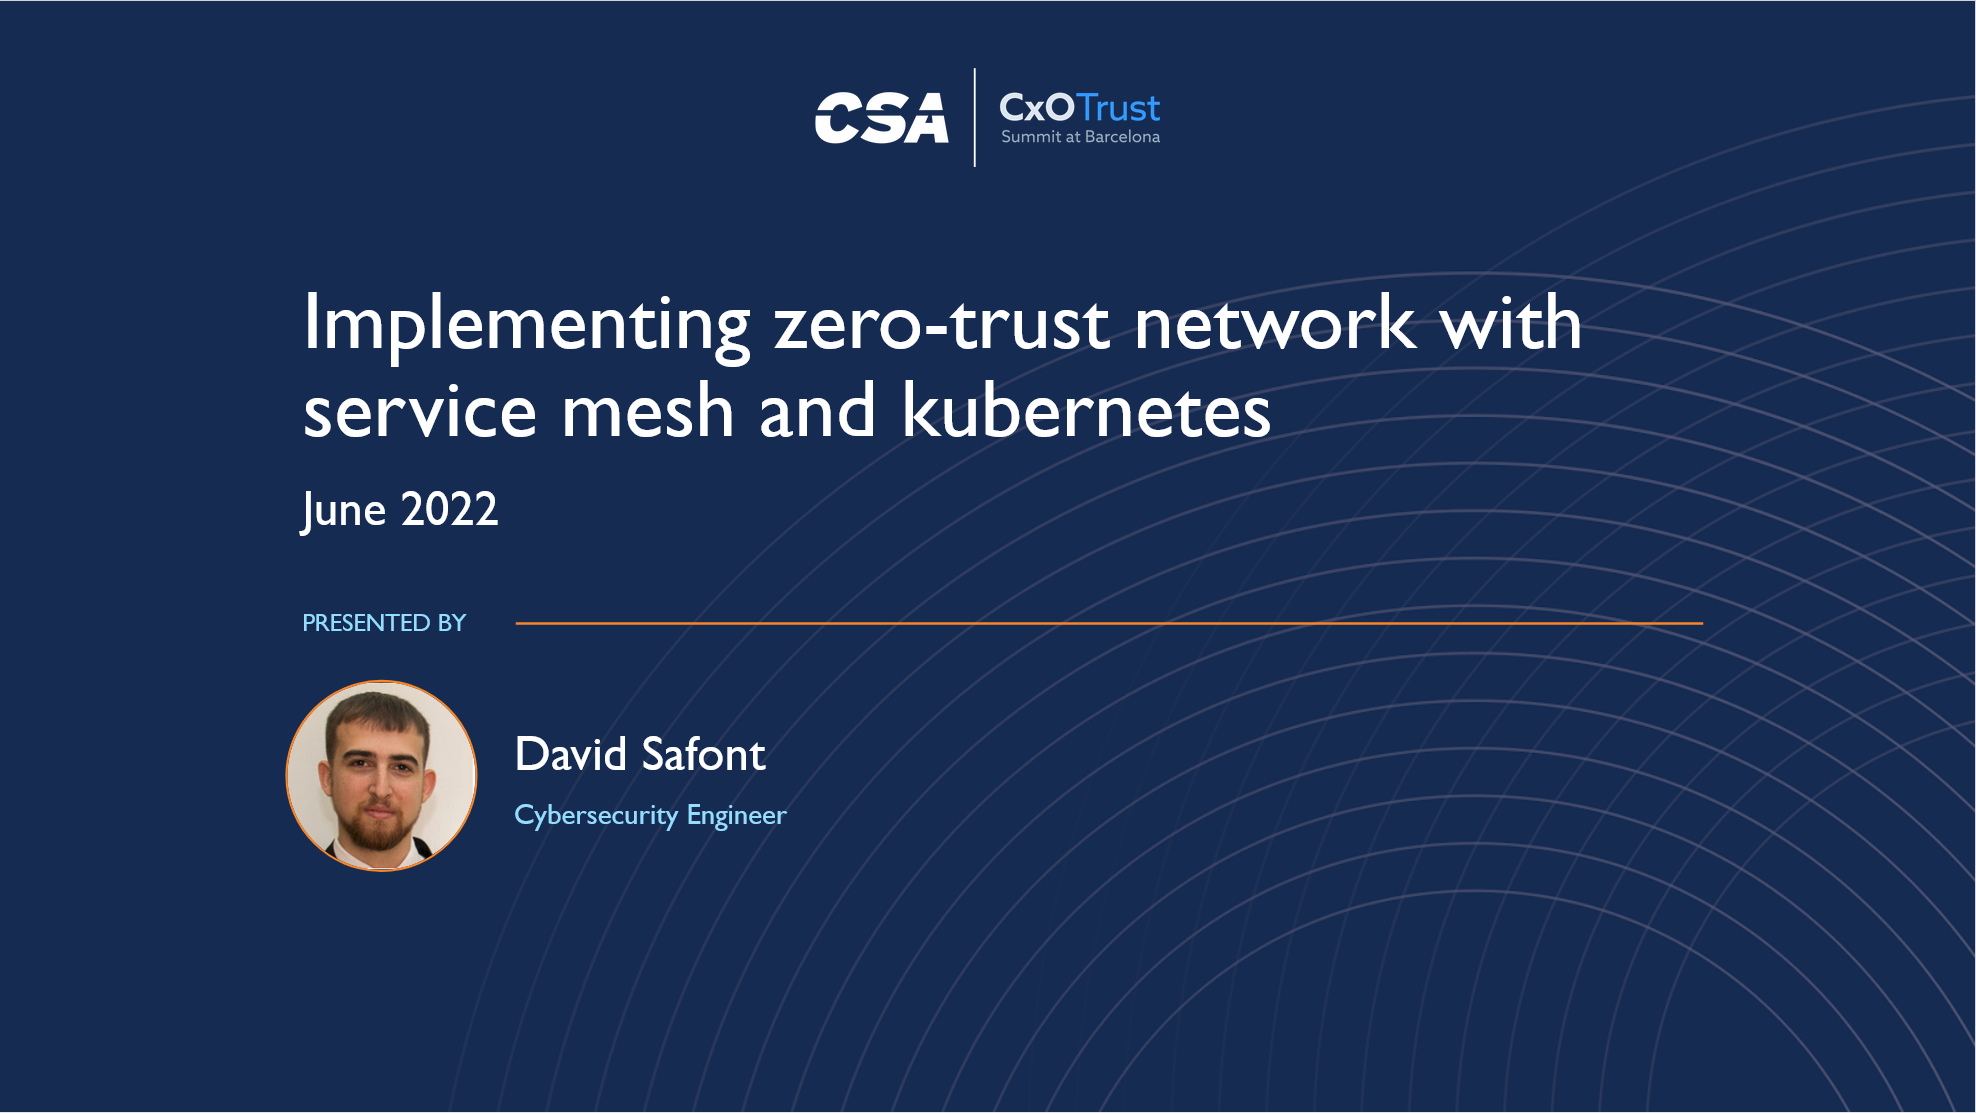 Implementing zero-trust network with service mesh and kubernetes